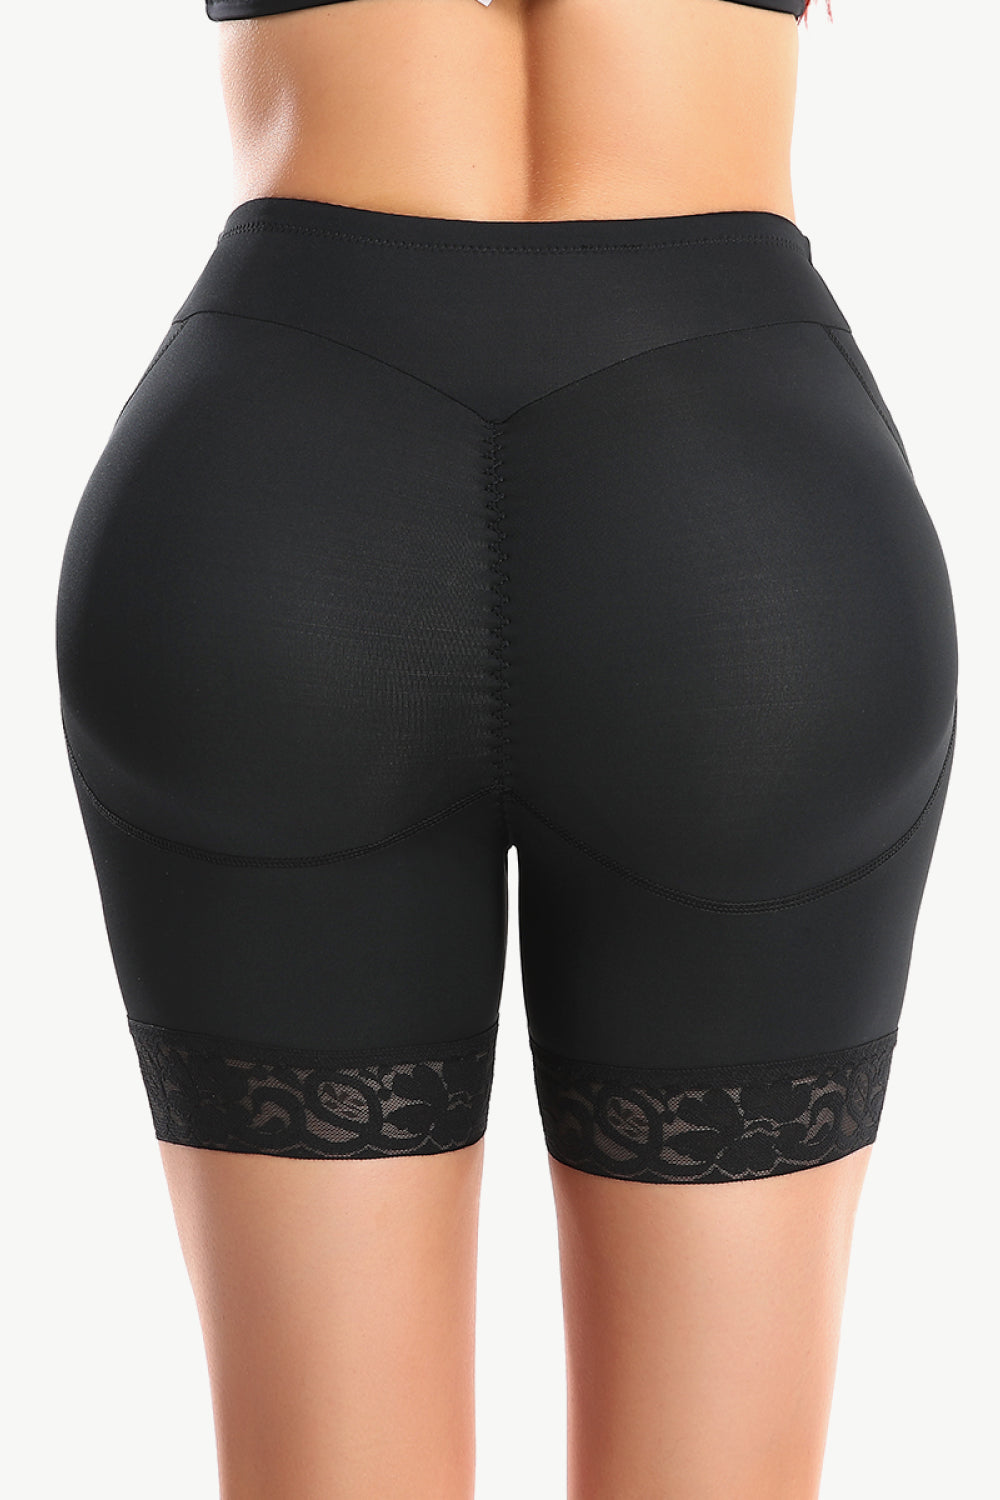 Full Size Lace Trim Lifting Pull-On Shaping Shorts - Shapewear - FITGGINS